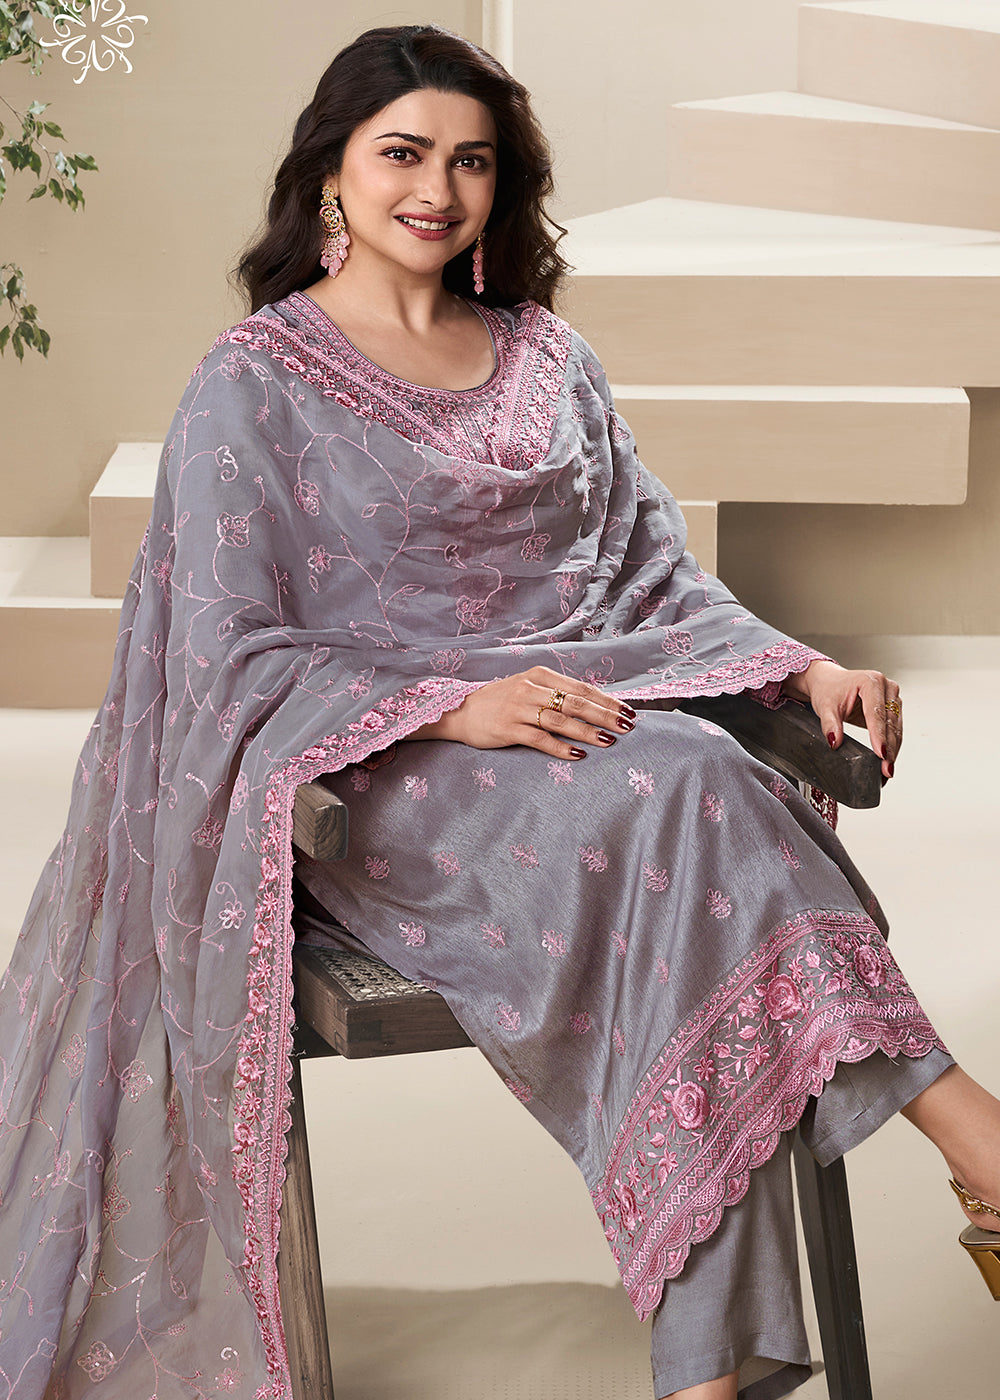 Buy Now Dola Silk Lilac Thread Embroidered Wedding Salwar Suit Online in USA, UK, Canada, Germany, Australia & Worldwide at Empress Clothing.